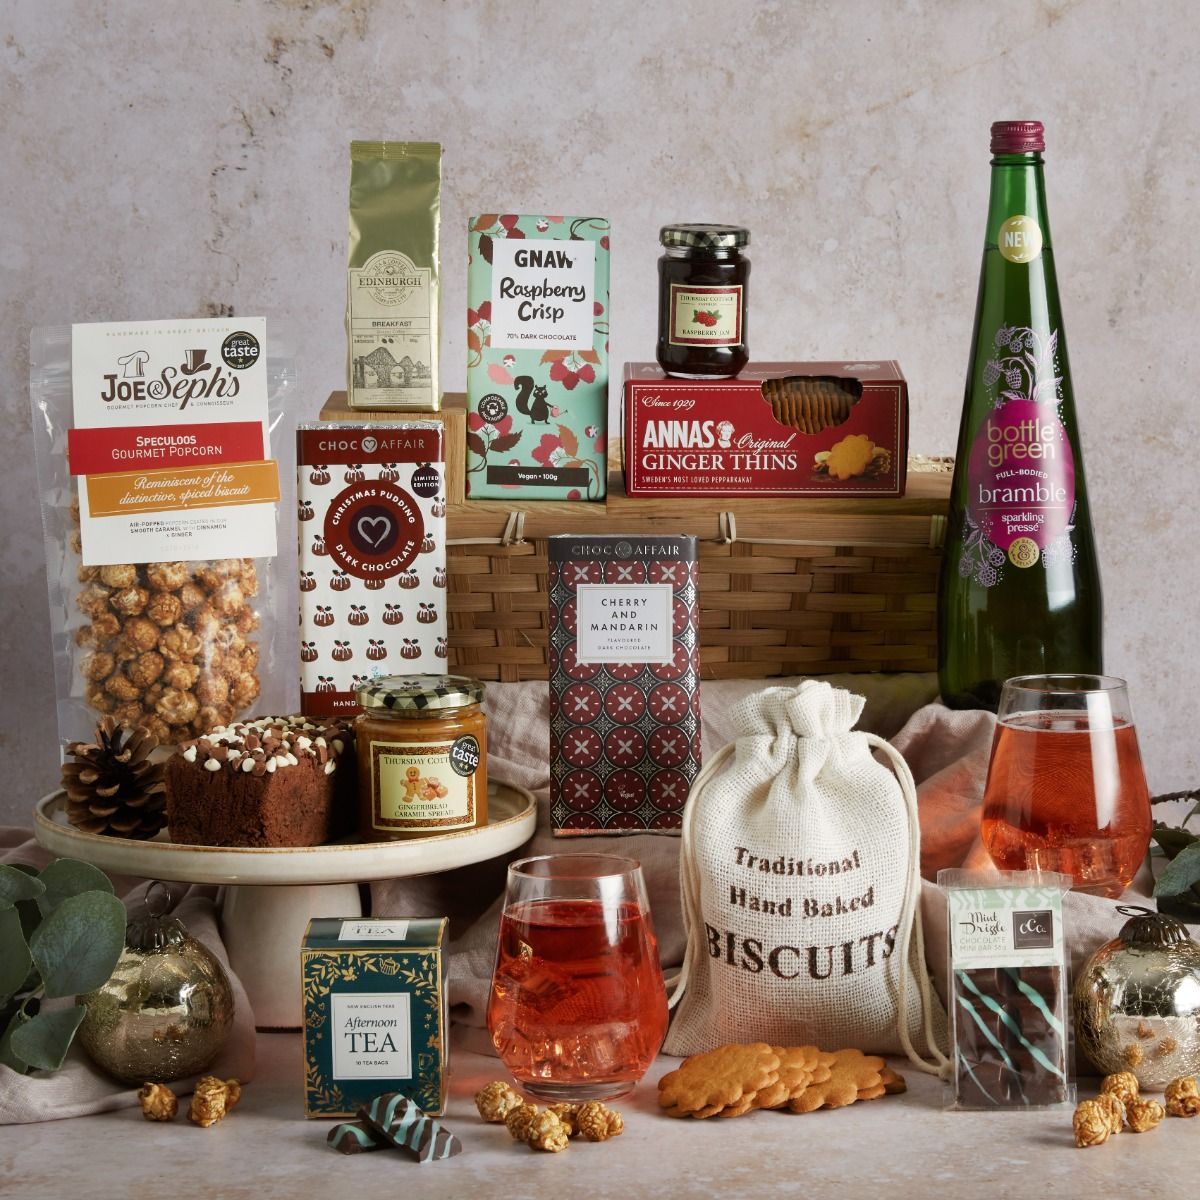 The luxury alcohol free Christmas hamper with contents on display and gift basket